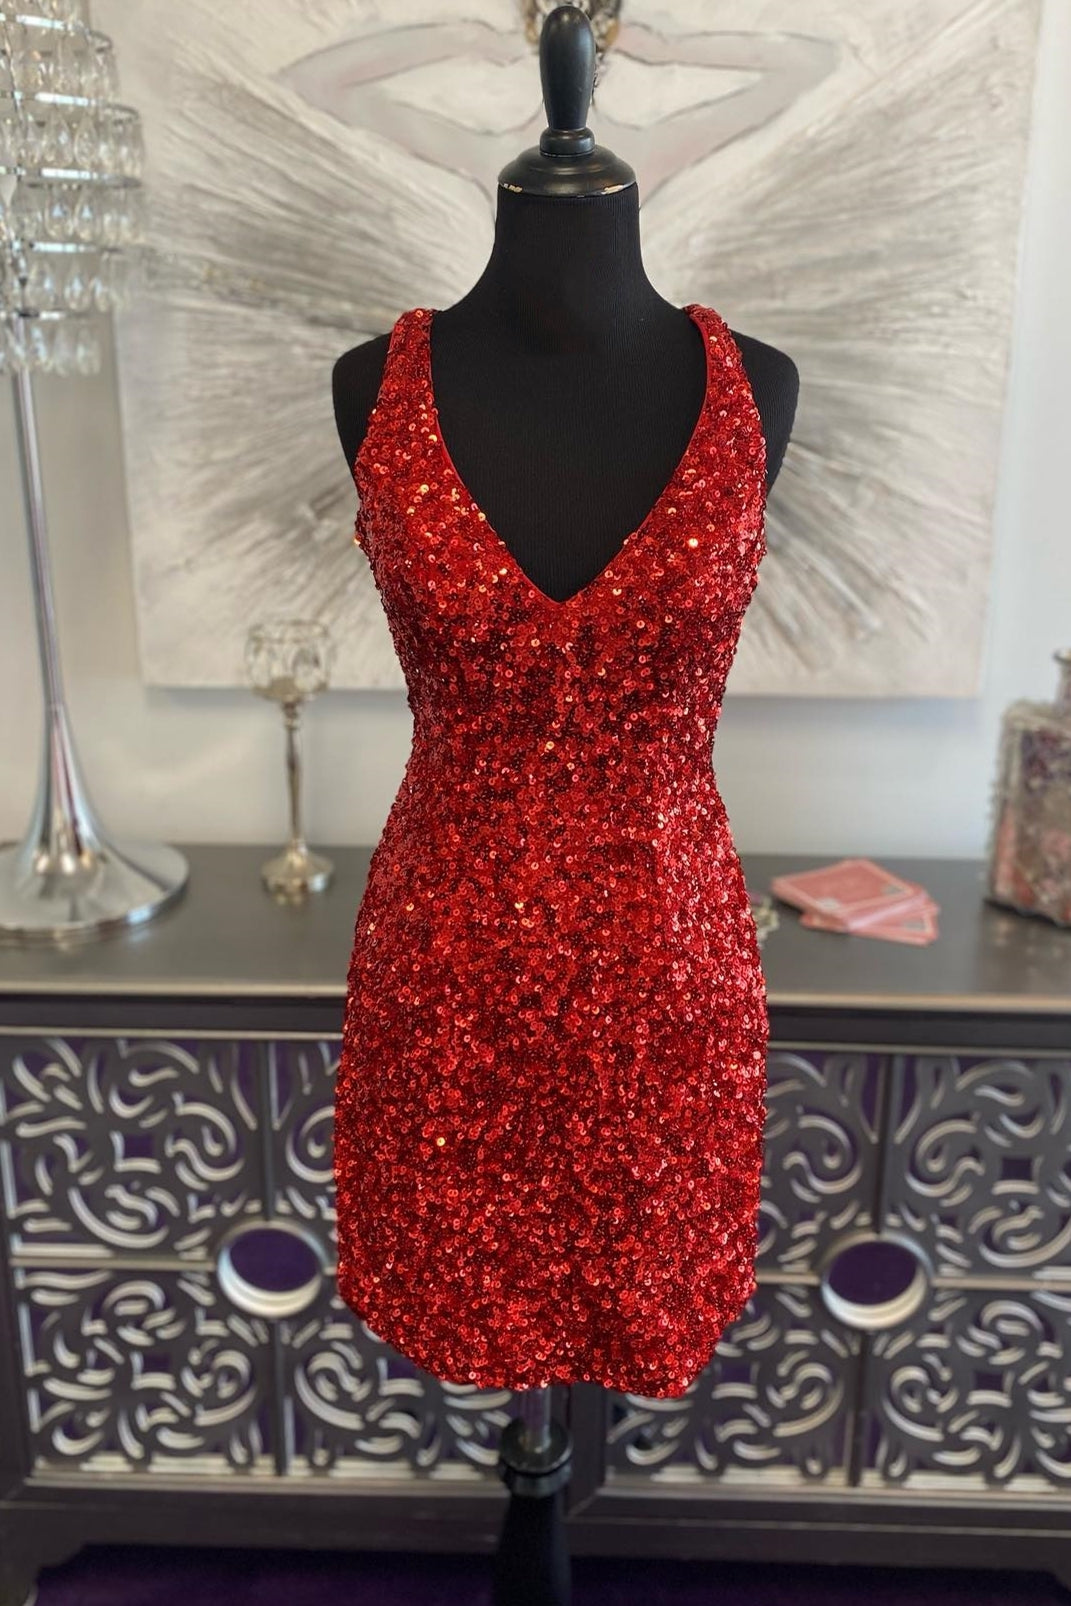 Red Sequin V Neck Bodycon Short Party Dress with Cross Back